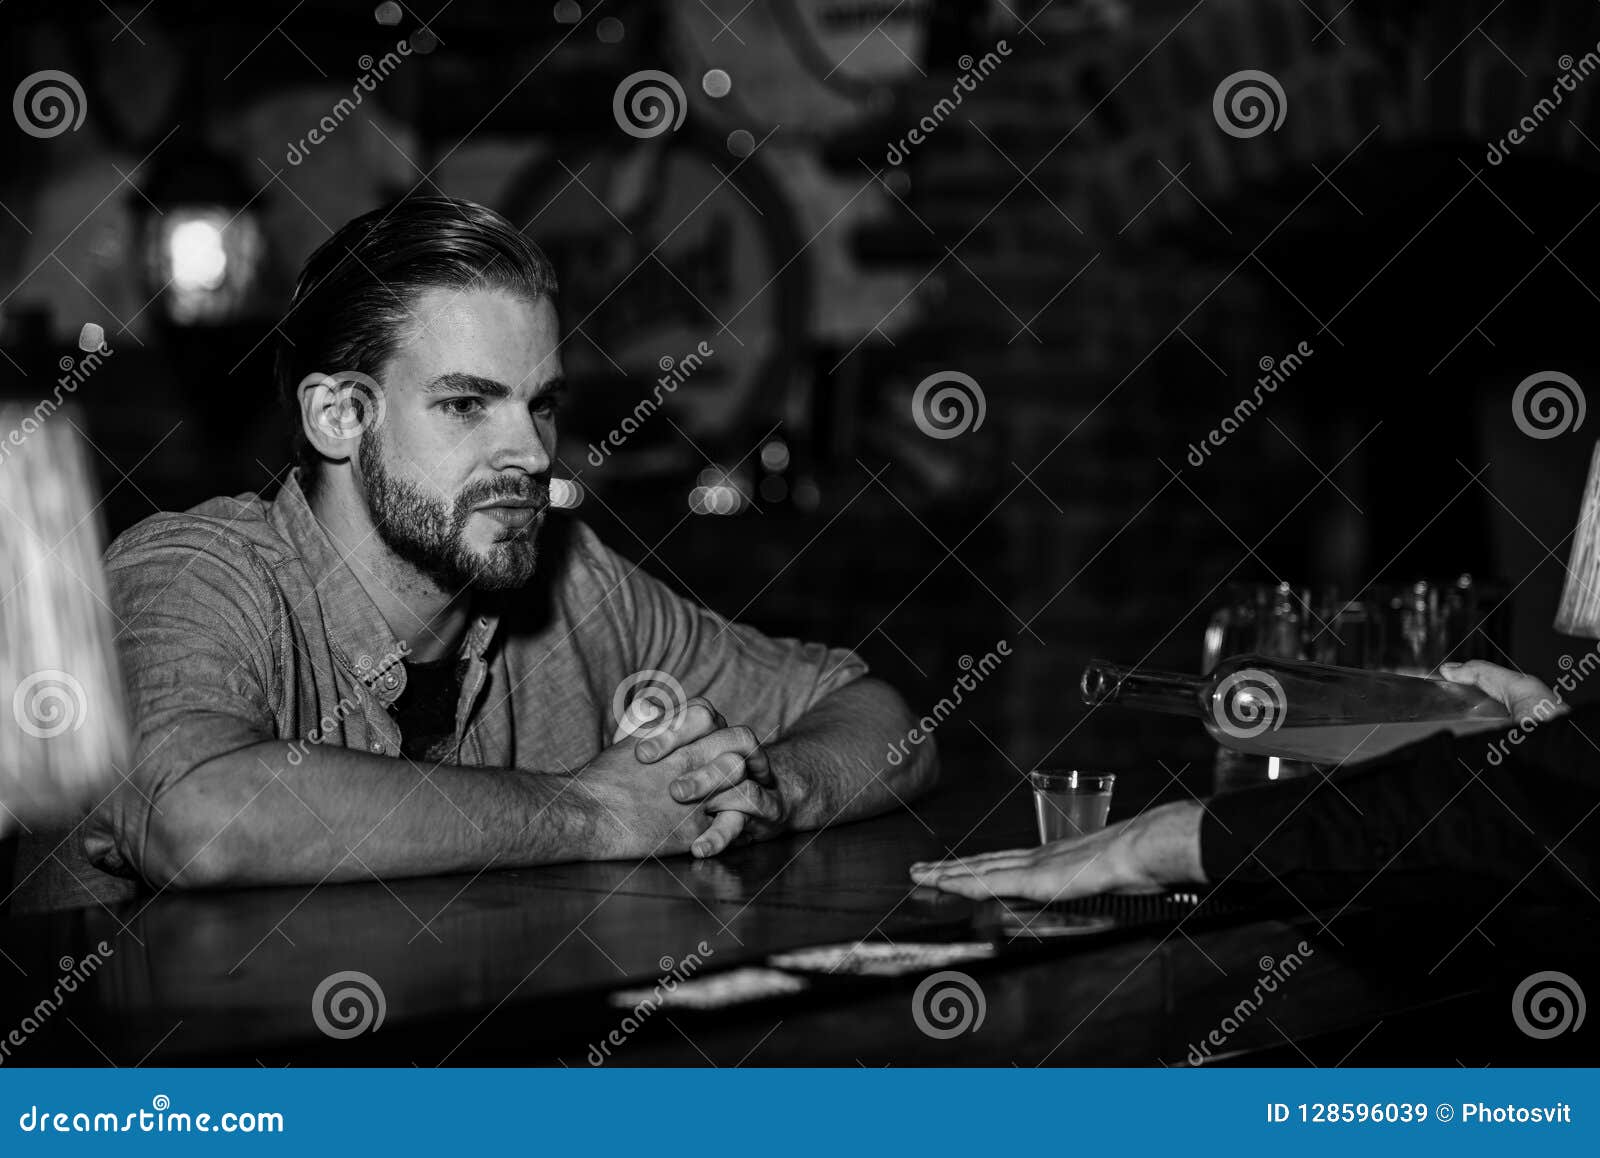 Man with Beard Sits at Bar Counter on Pub Background. Stock Image ...